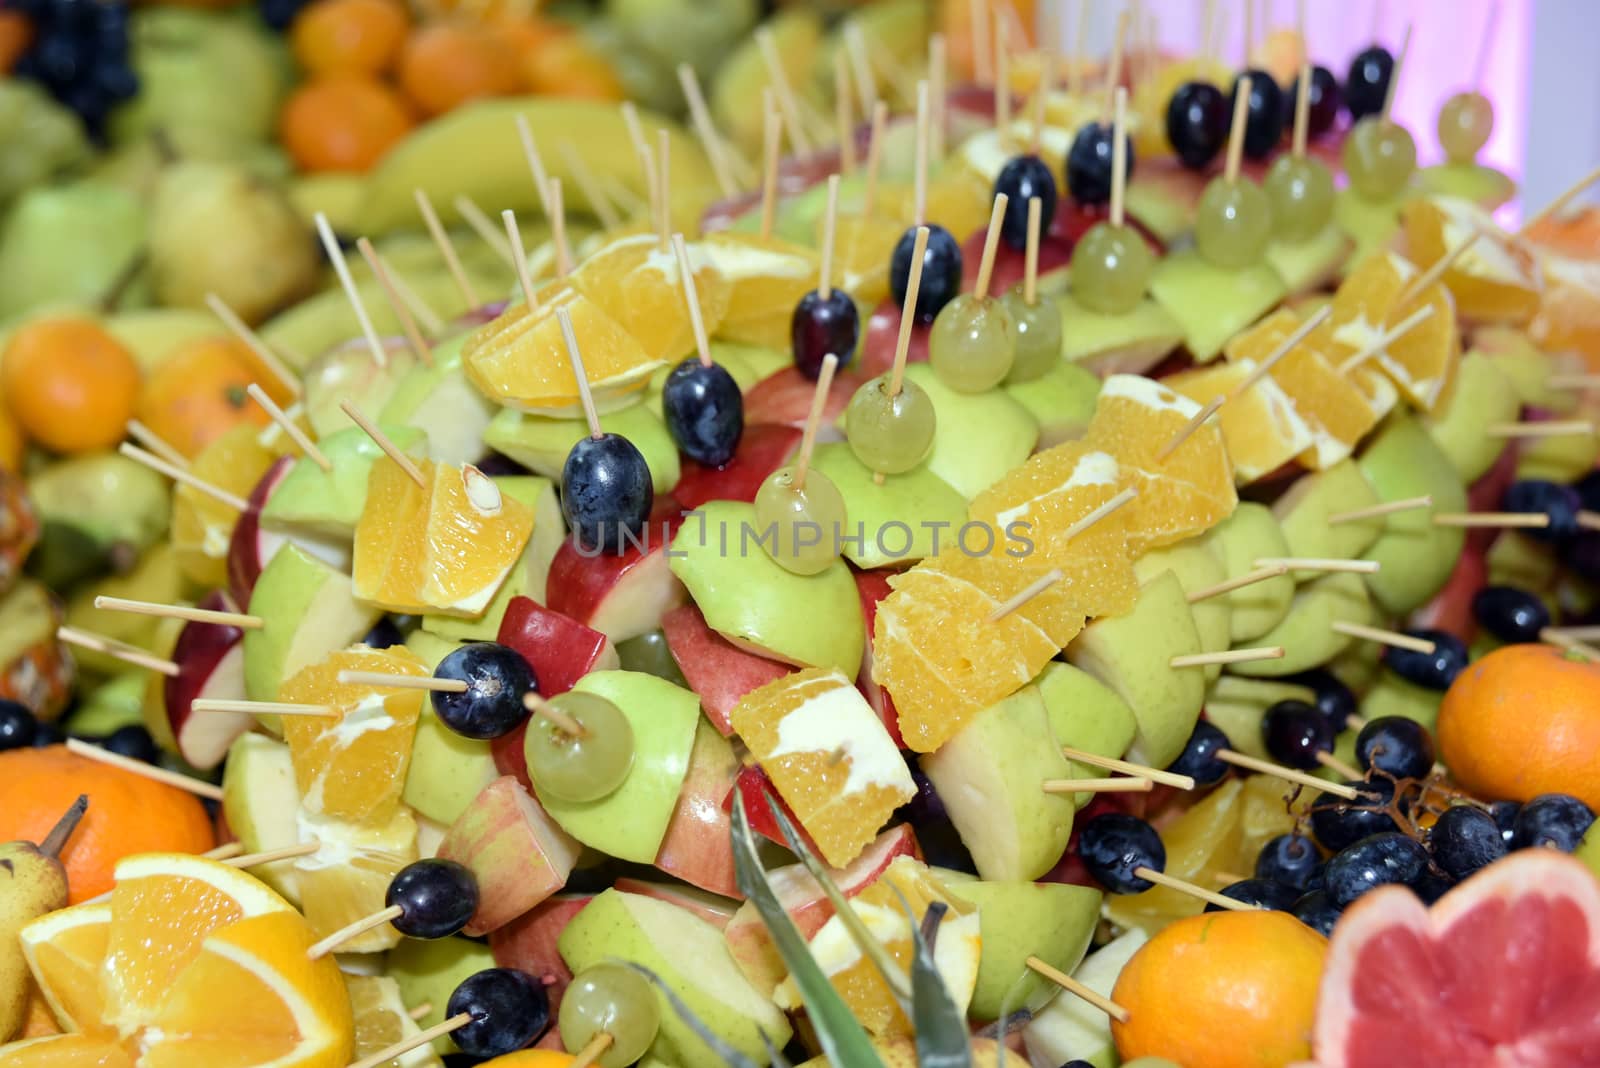 Served various fruits by aselsa